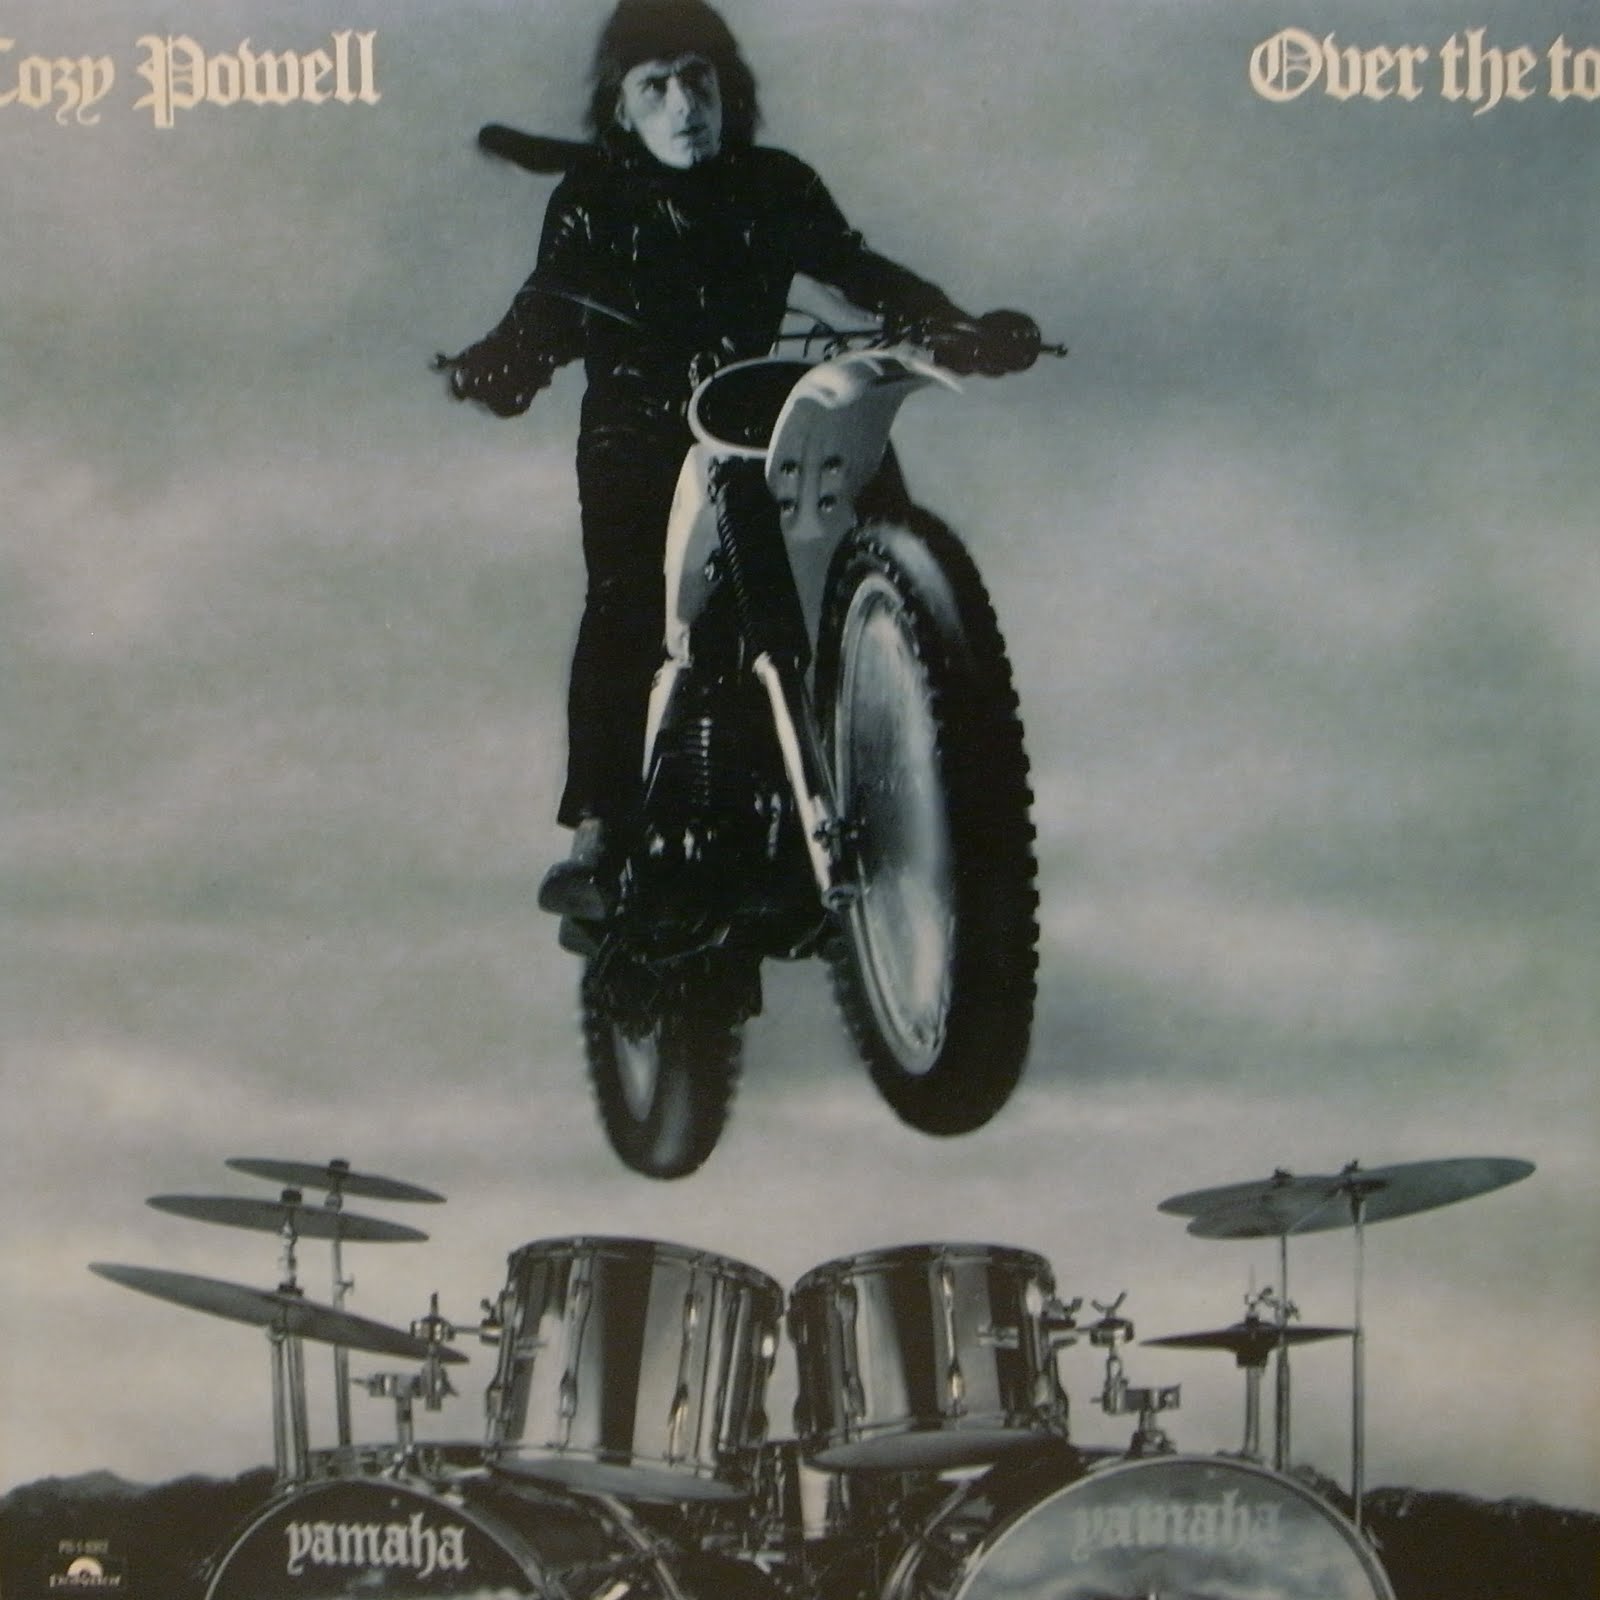 COZY POWELL Over the Top reviews and MP3